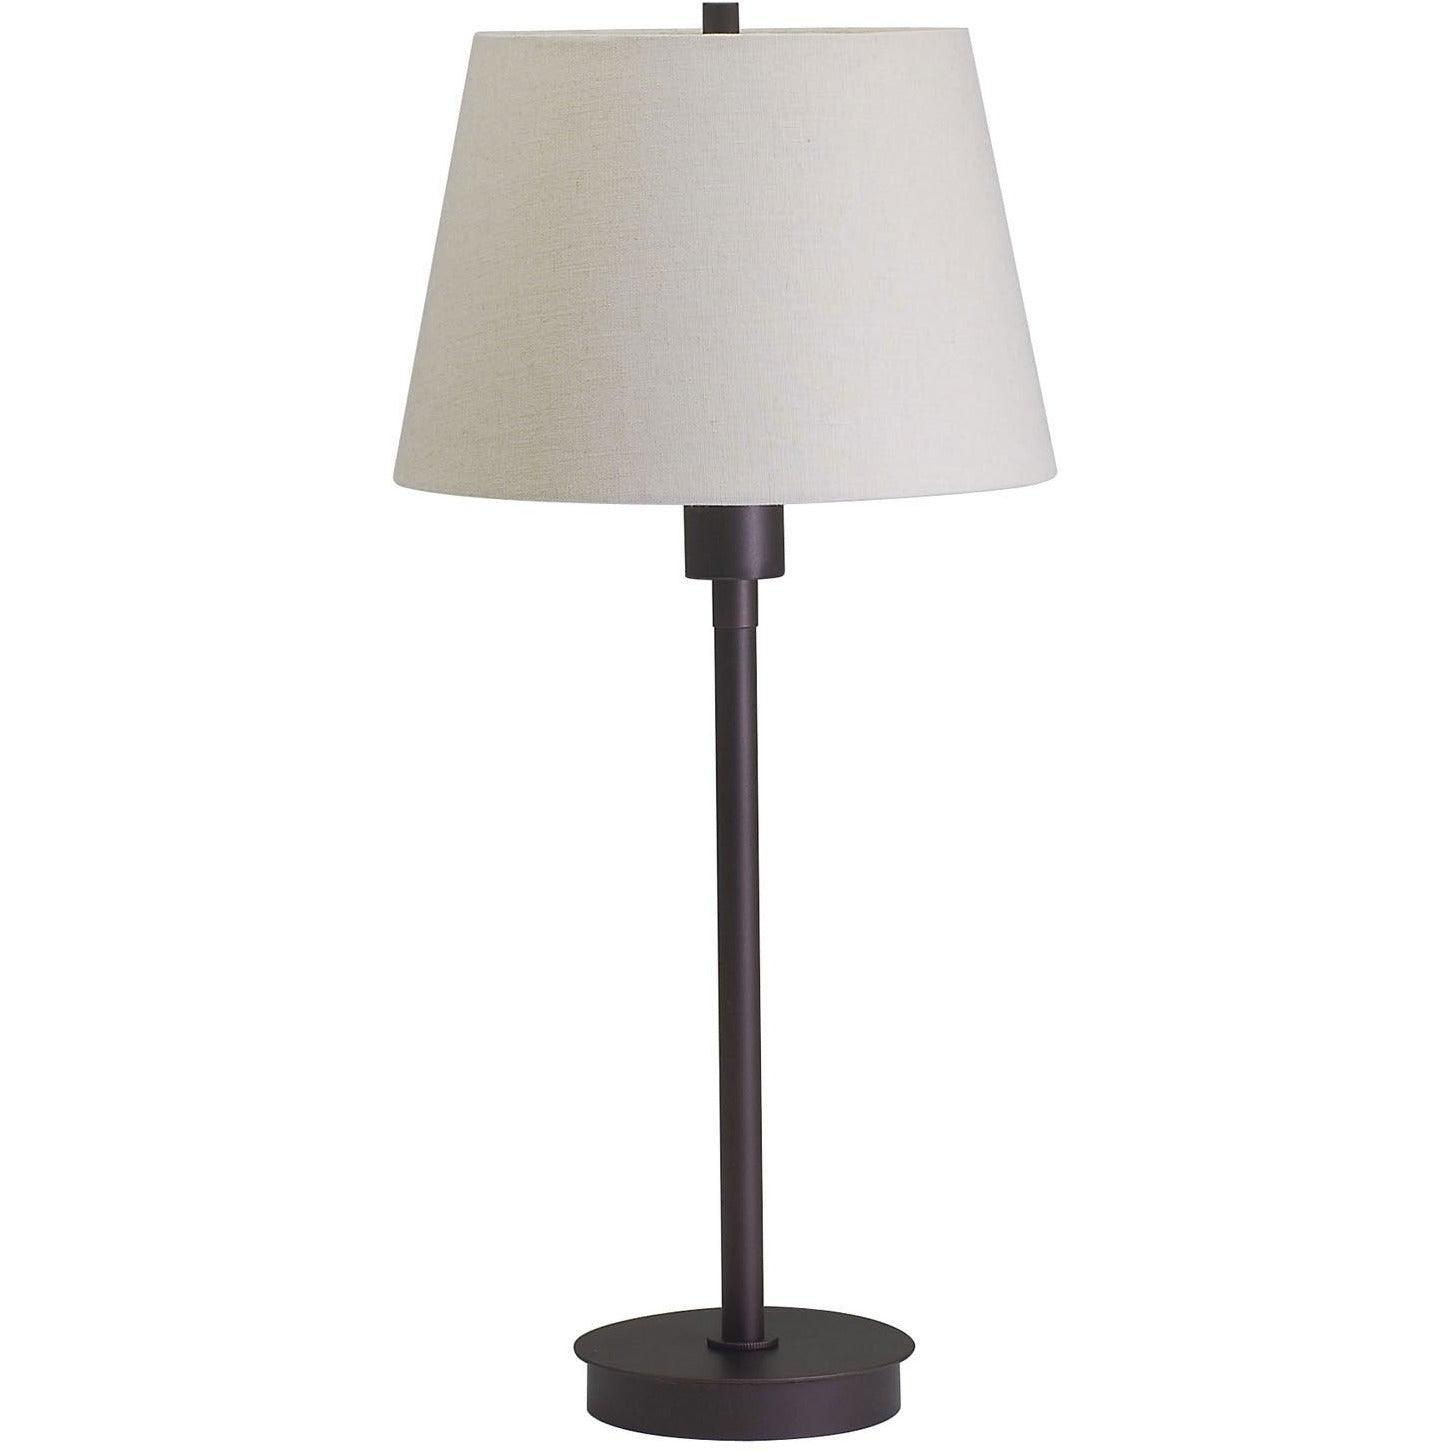 House of Troy - Generation One Light Table Lamp - G250-CHB | Montreal Lighting & Hardware